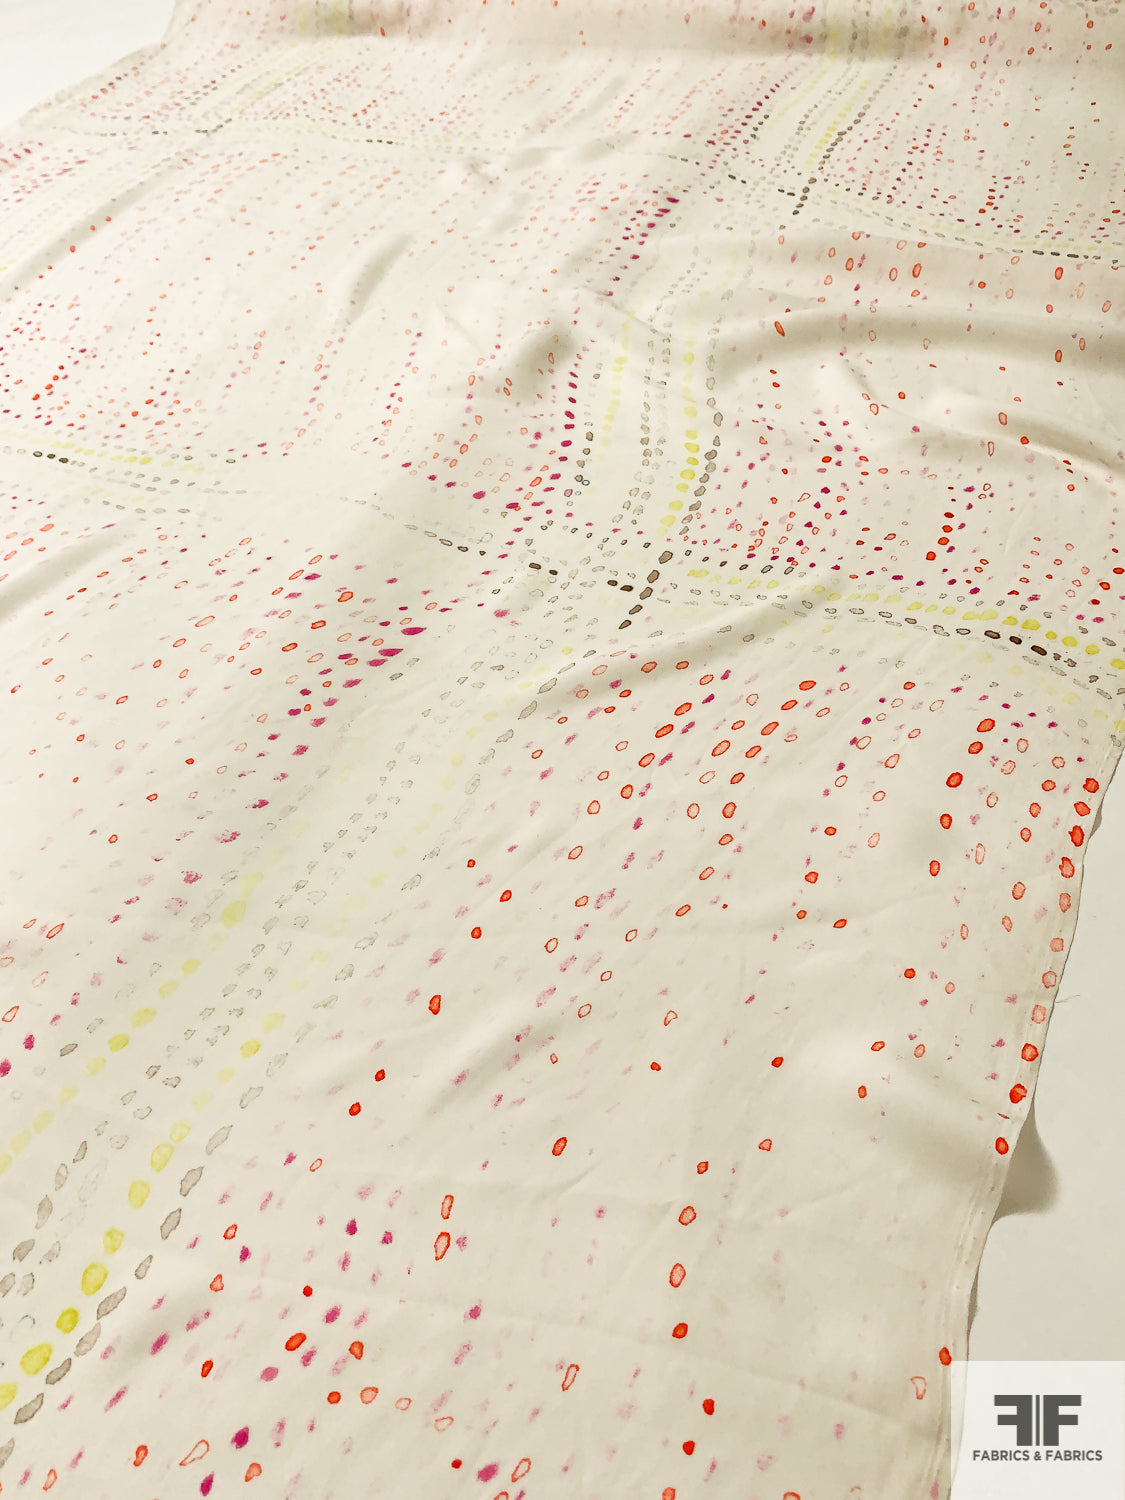 Watercolor Scattered Dots in Windowpane Pattern Printed Silk Georgette - Ivory / Fiery Orange / Orchid Pink / Yellow